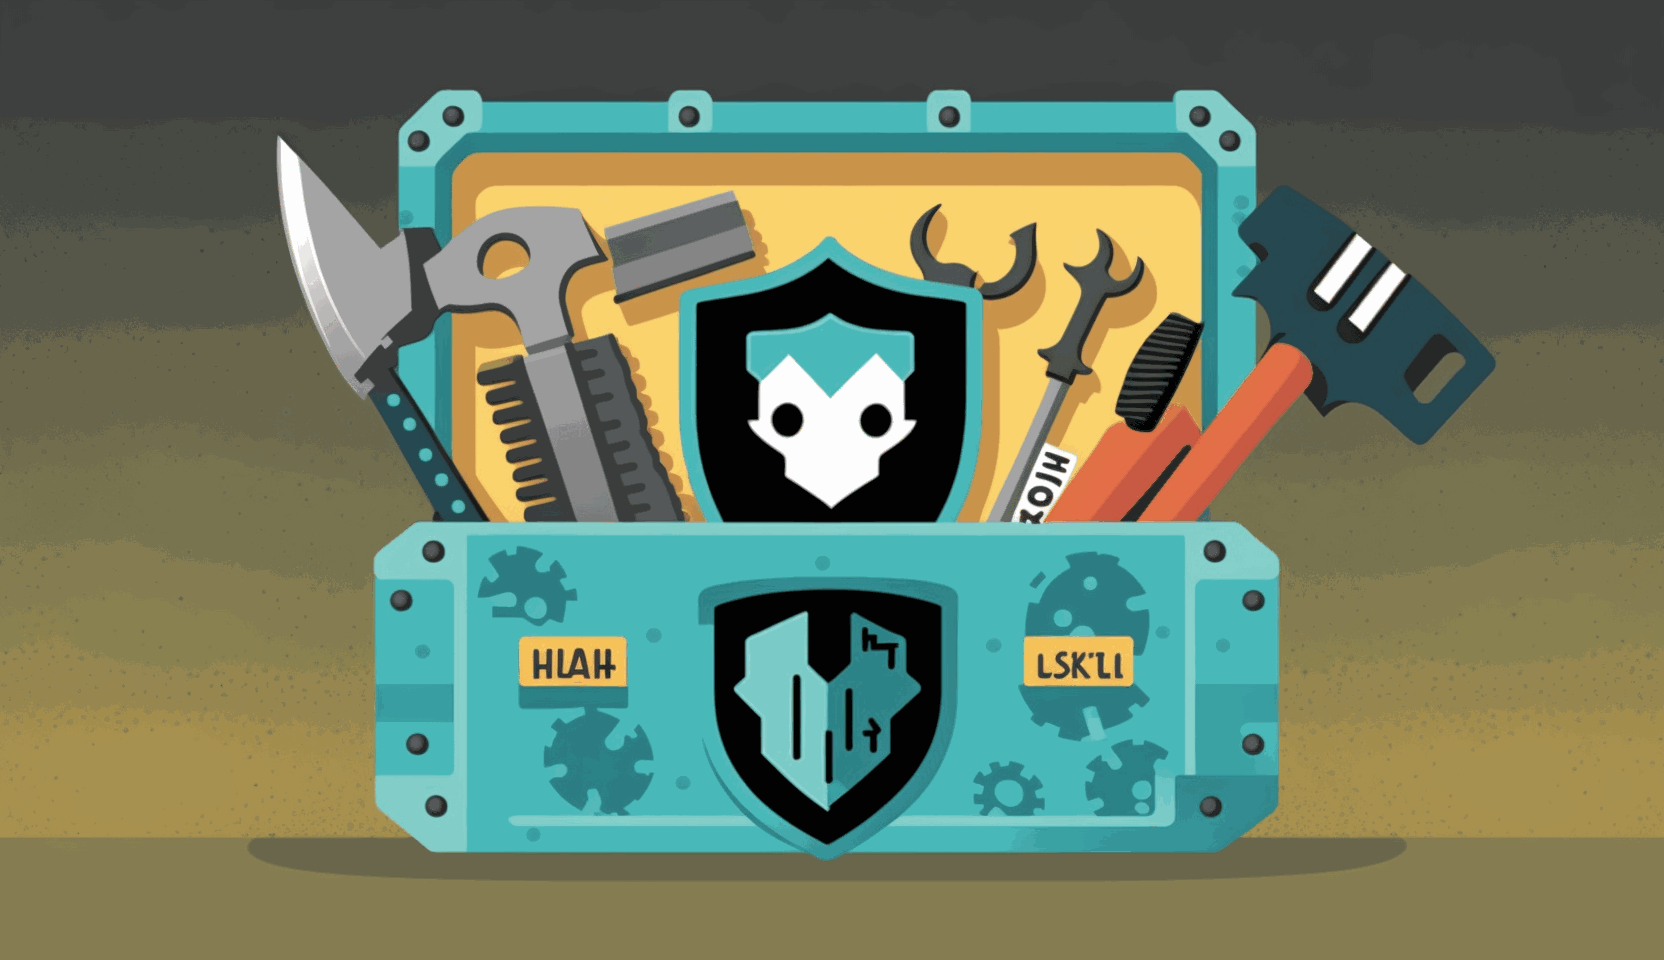 A cartoon-style image of a toolbox with open source logos on each tool, along with a shield with a lock in the center to represent cybersecurity, all on a background with binary code.